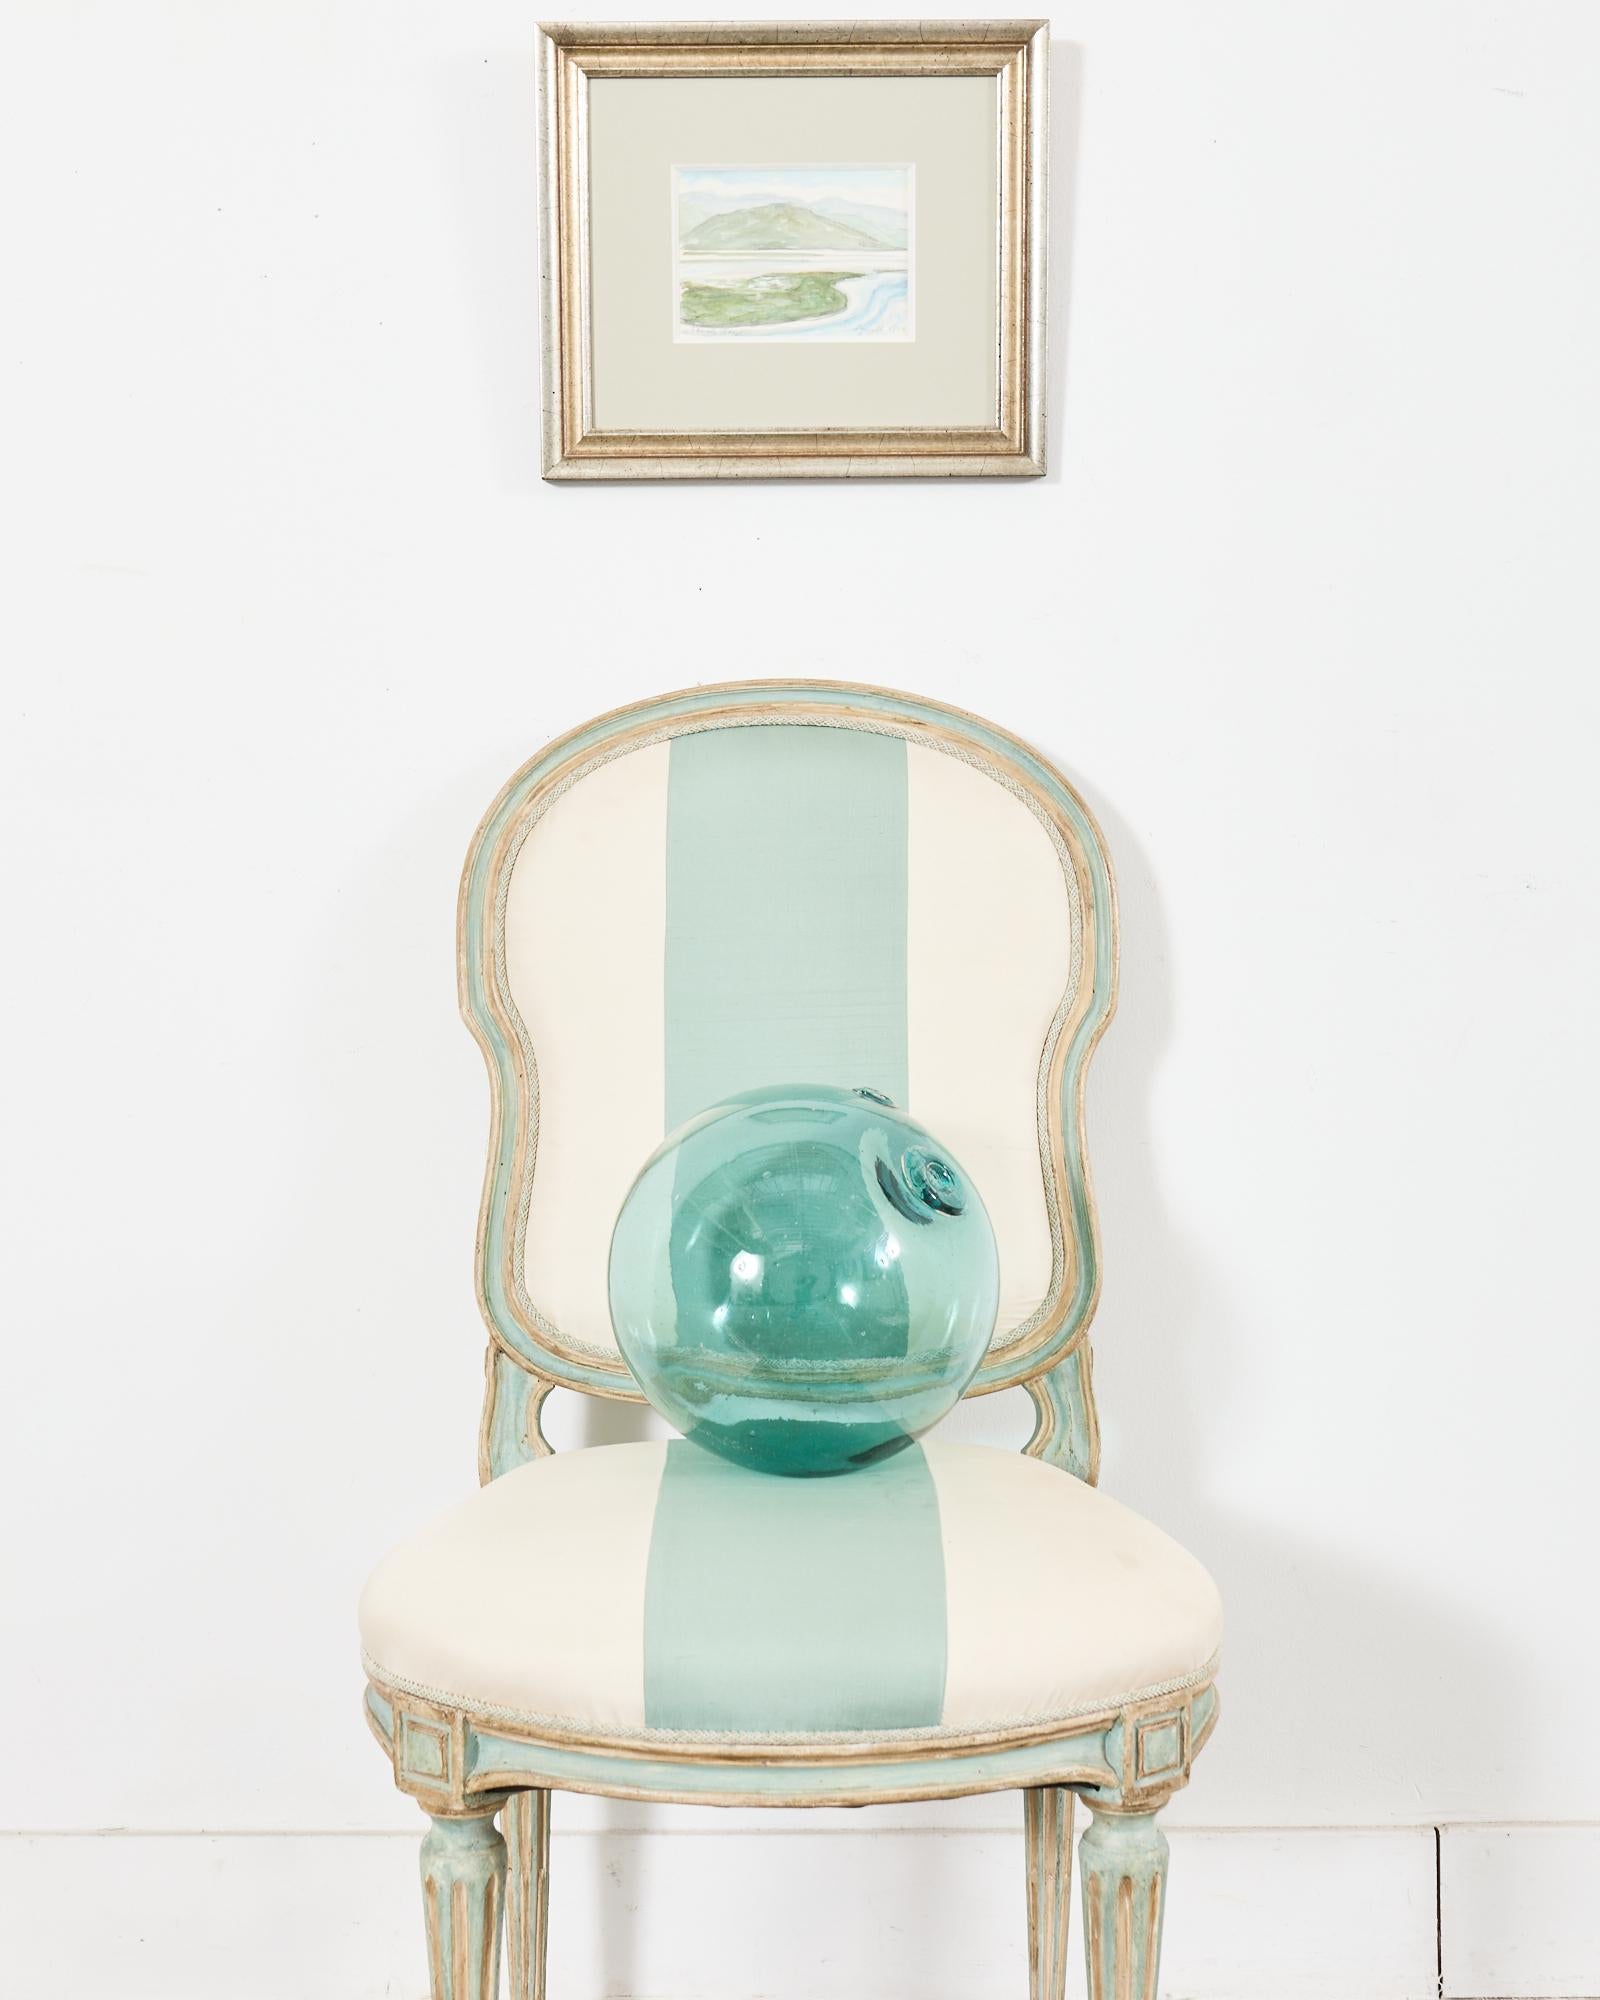 Gorgeous distressed dining chair made in the neoclassical French Louis XVI taste by Dennis & Leen Hollywood, CA. The Louis XVI side chair features an intentionally aged painted patina in a robin's egg green or verdigris as Dennis & Leen call them.